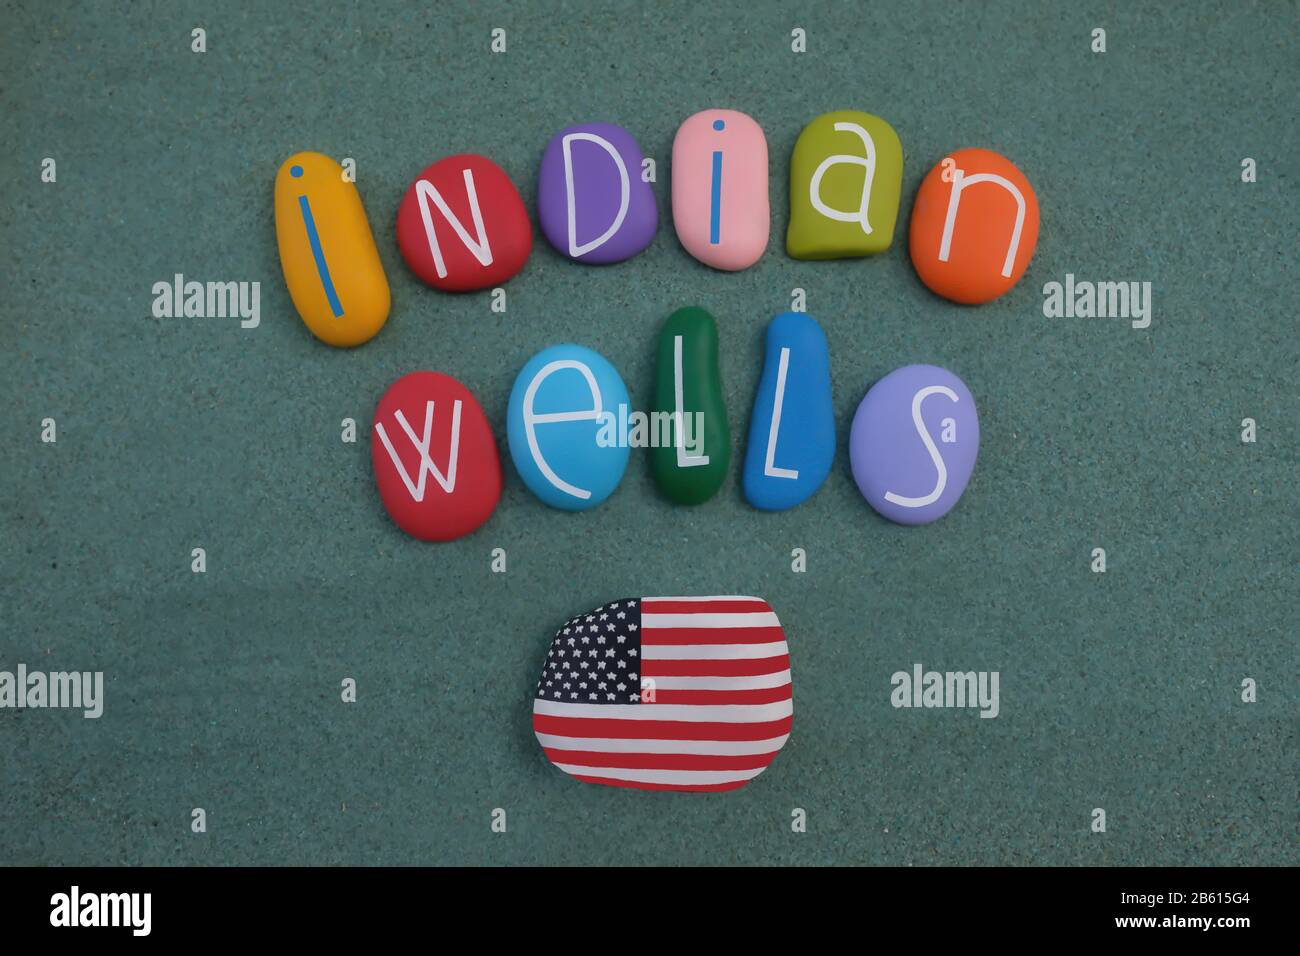 Indian Wells, city in Riverside County, California, in the Coachella Valley, USA, souvenir with colored stone letters and USA flag painted on a rock Stock Photo